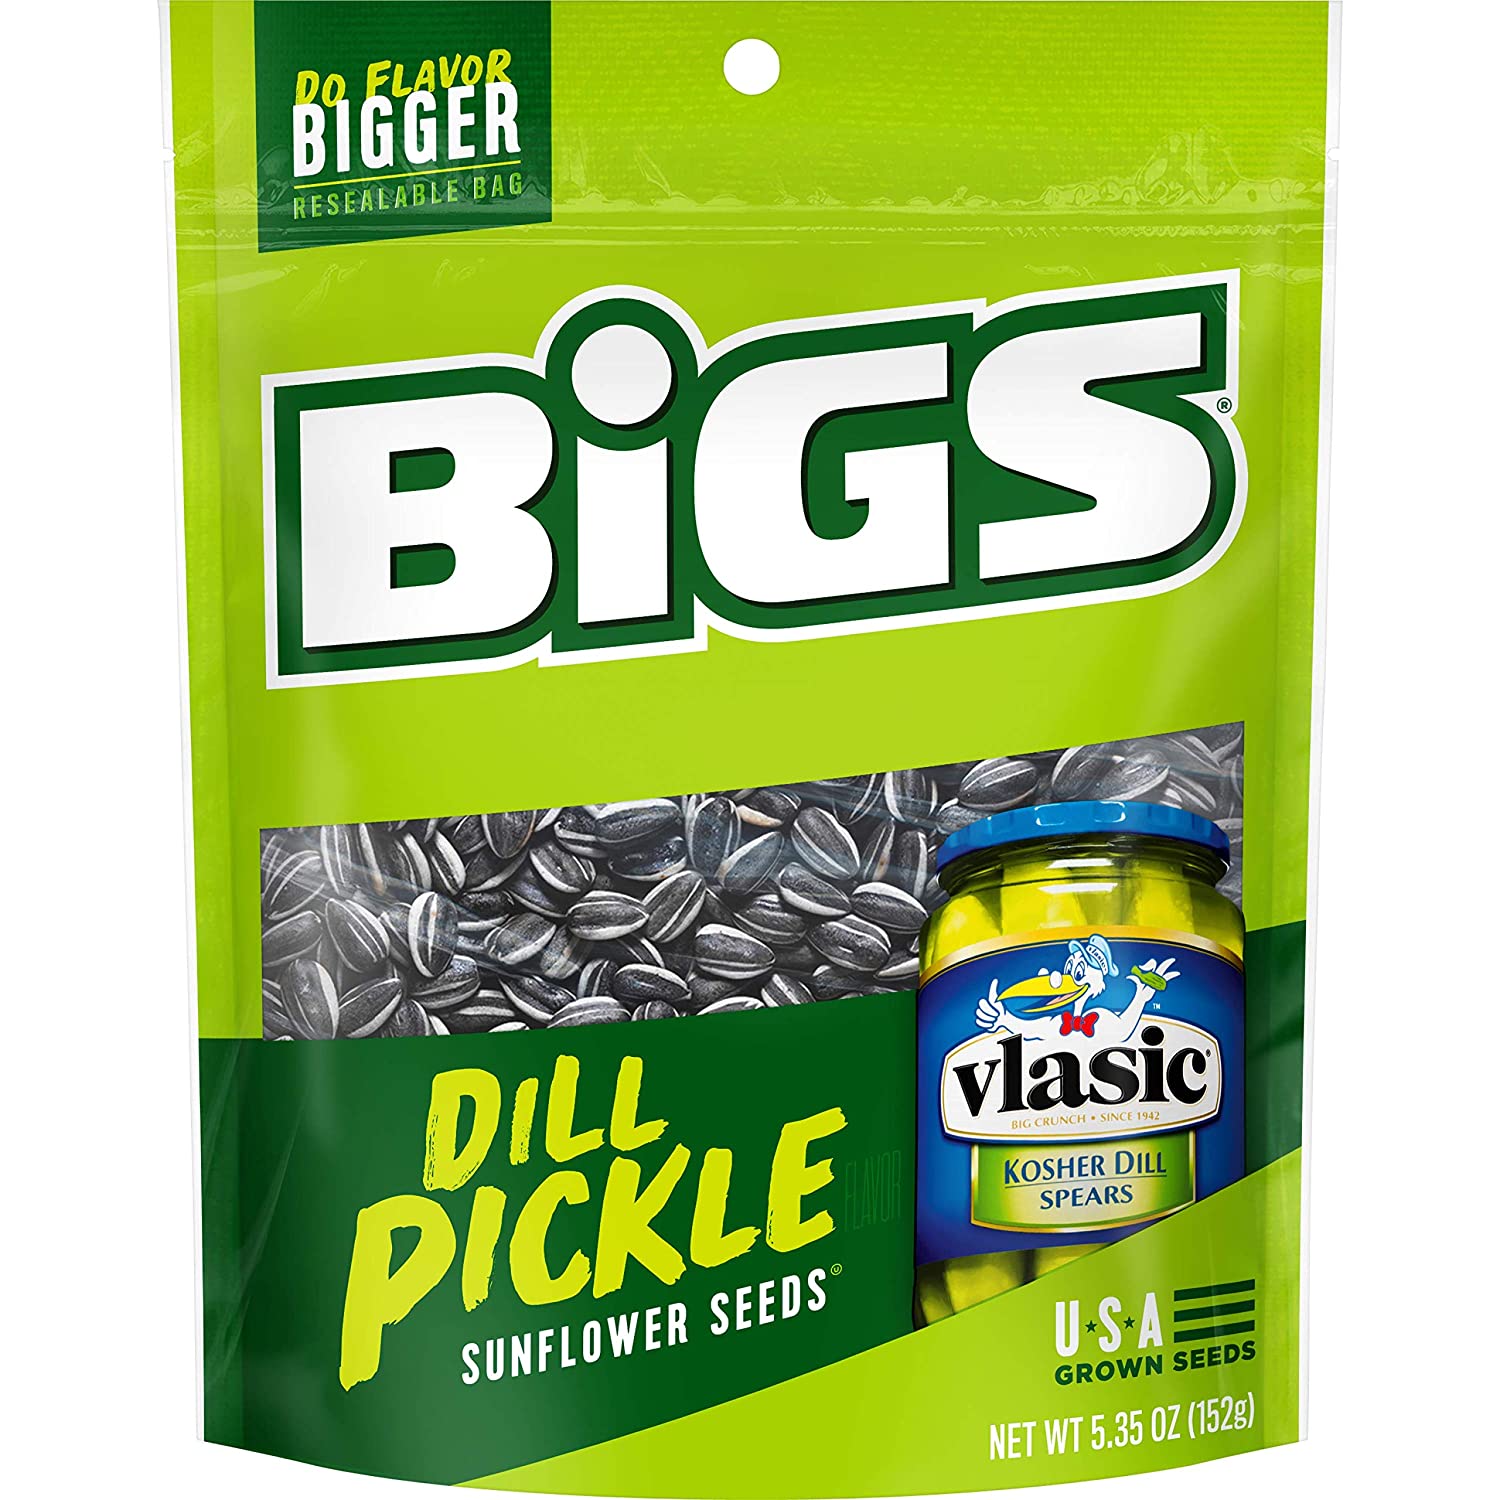 BIGS Vlasic Dill Pickle Sunflower Seeds, 5.35-Ounce Bags (Pack of 12)